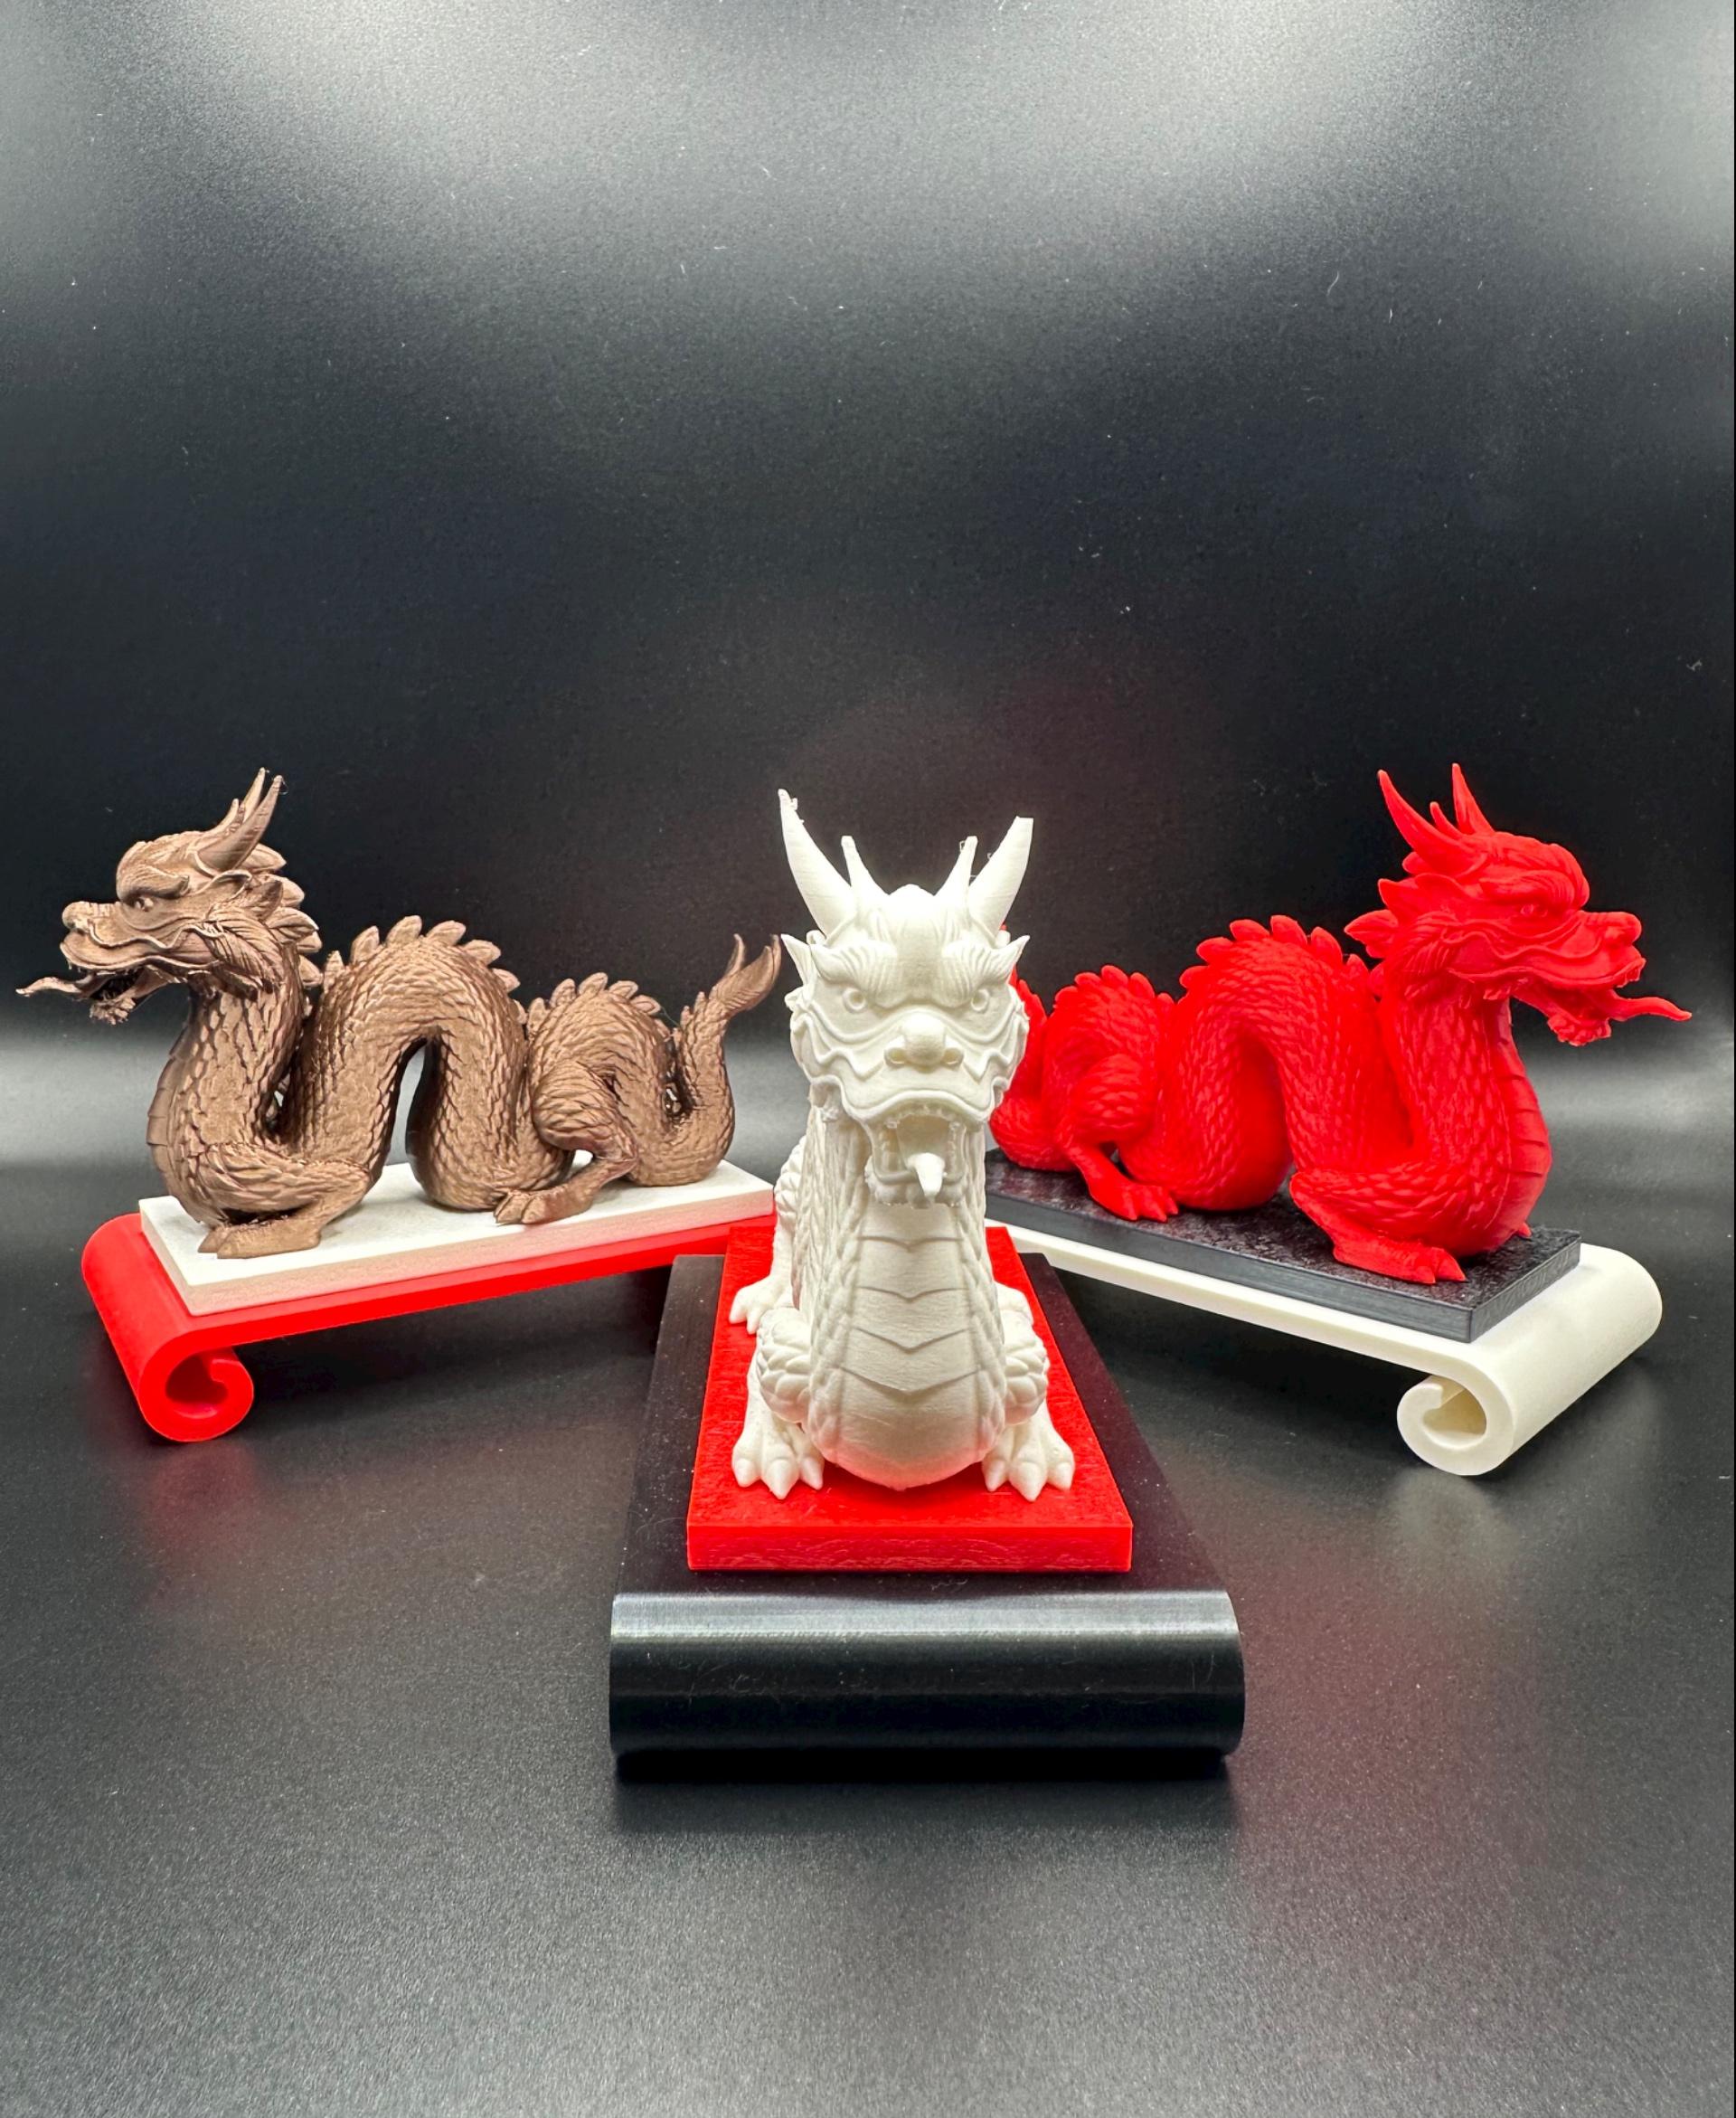 Chinese Dragon  - Mix and Match. Printed the parts in various colors using various filaments. Copper, red, black etc.  - 3d model